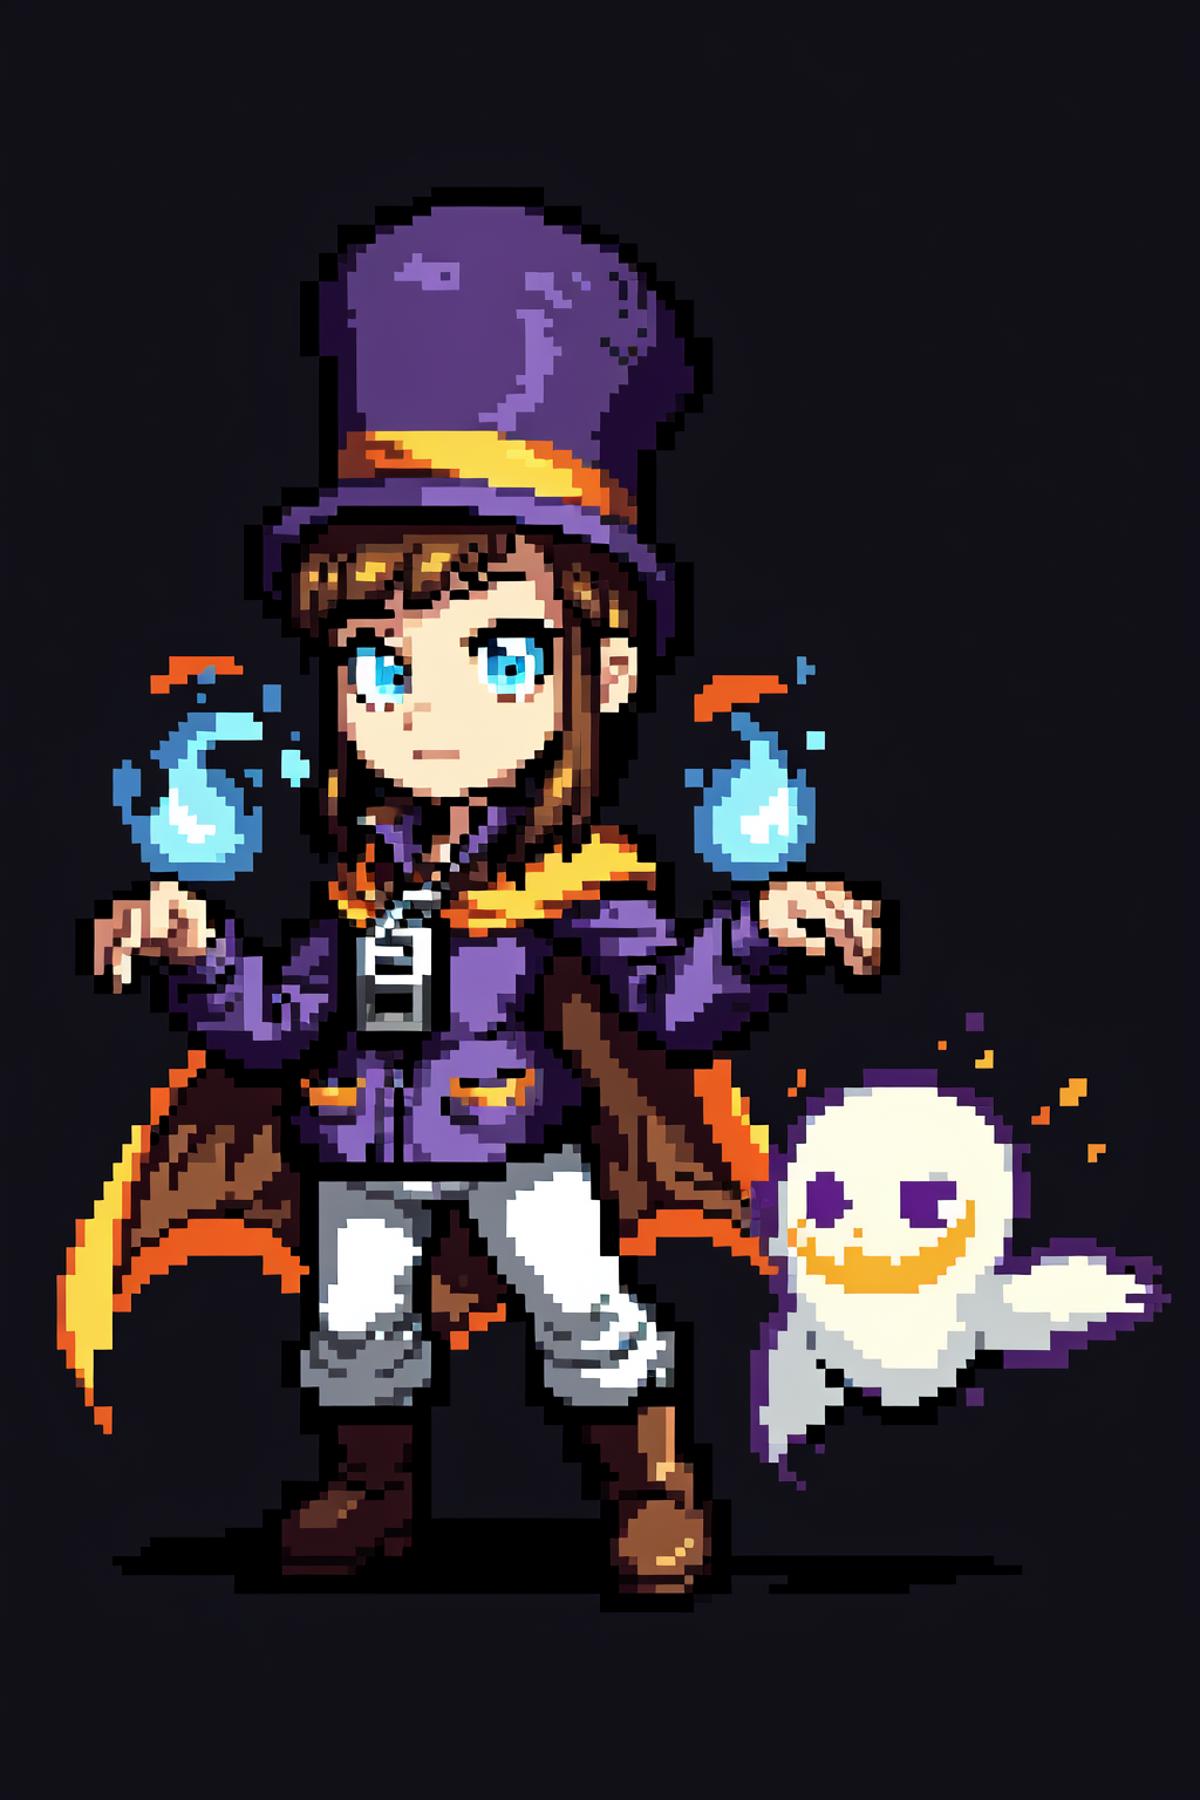 A Hat In Time - Hat Kid image by Kayako